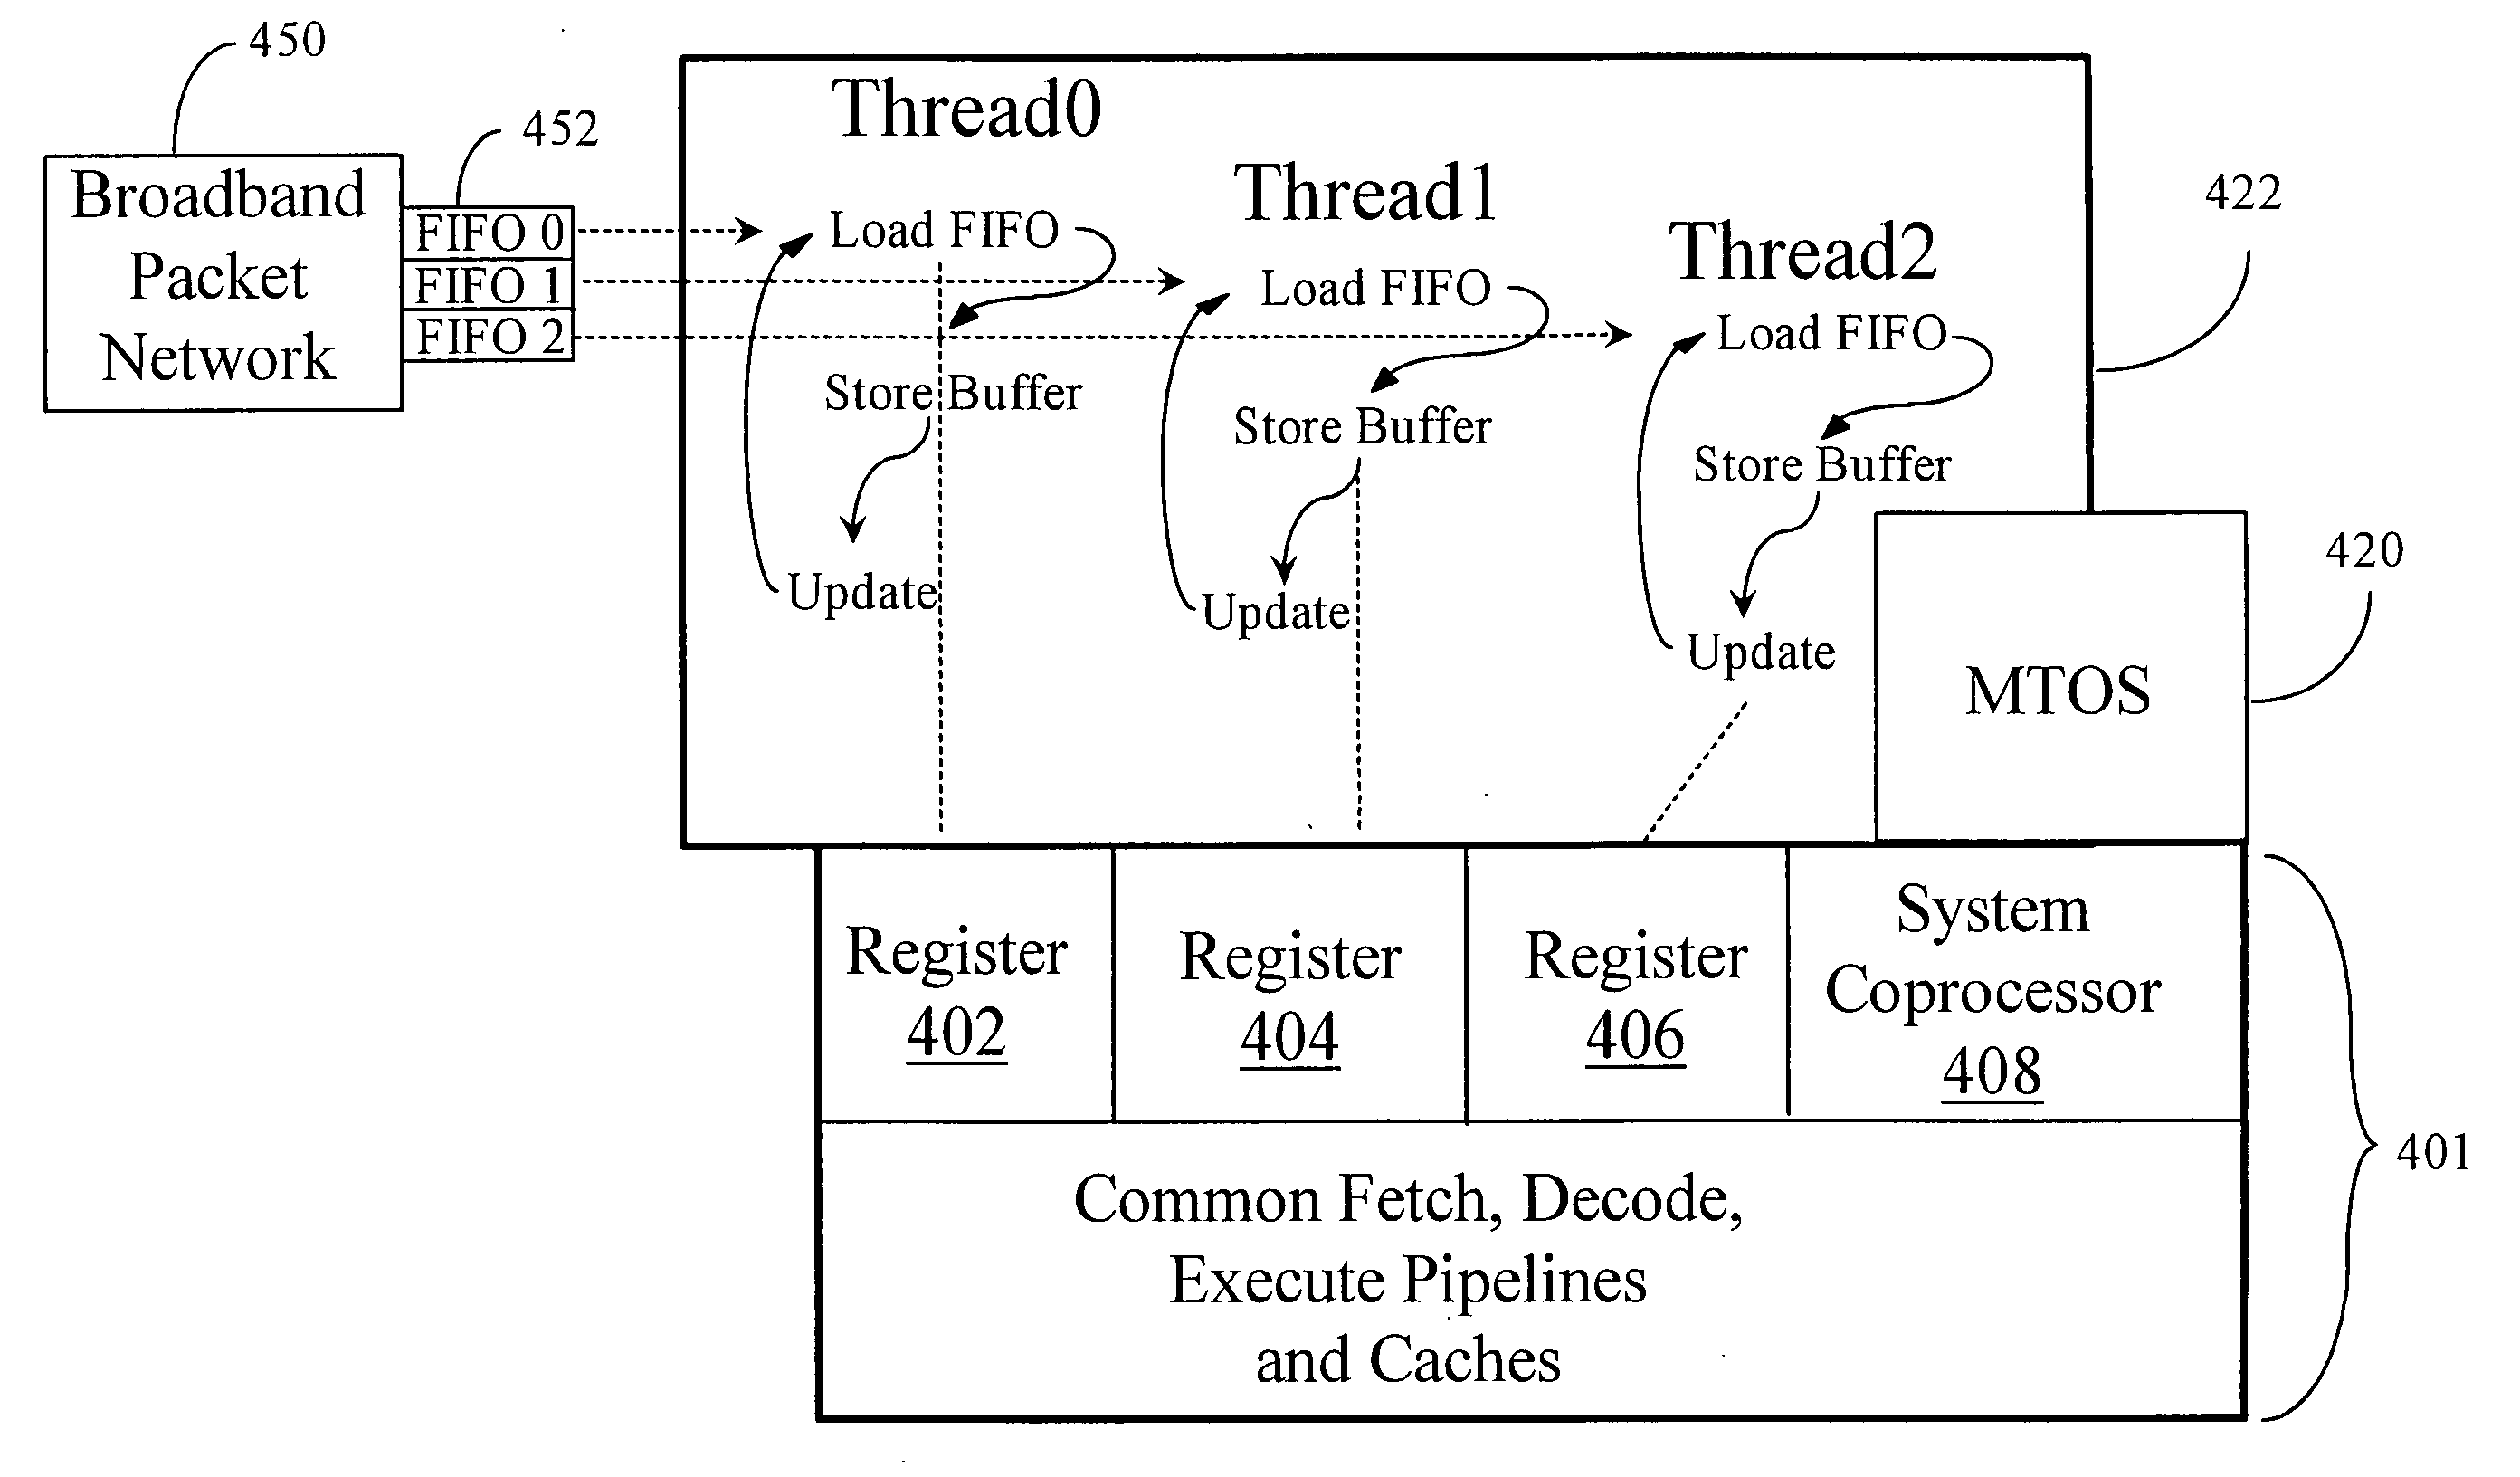 Integrated mechanism for suspension and deallocation of computational threads of execution in a processor